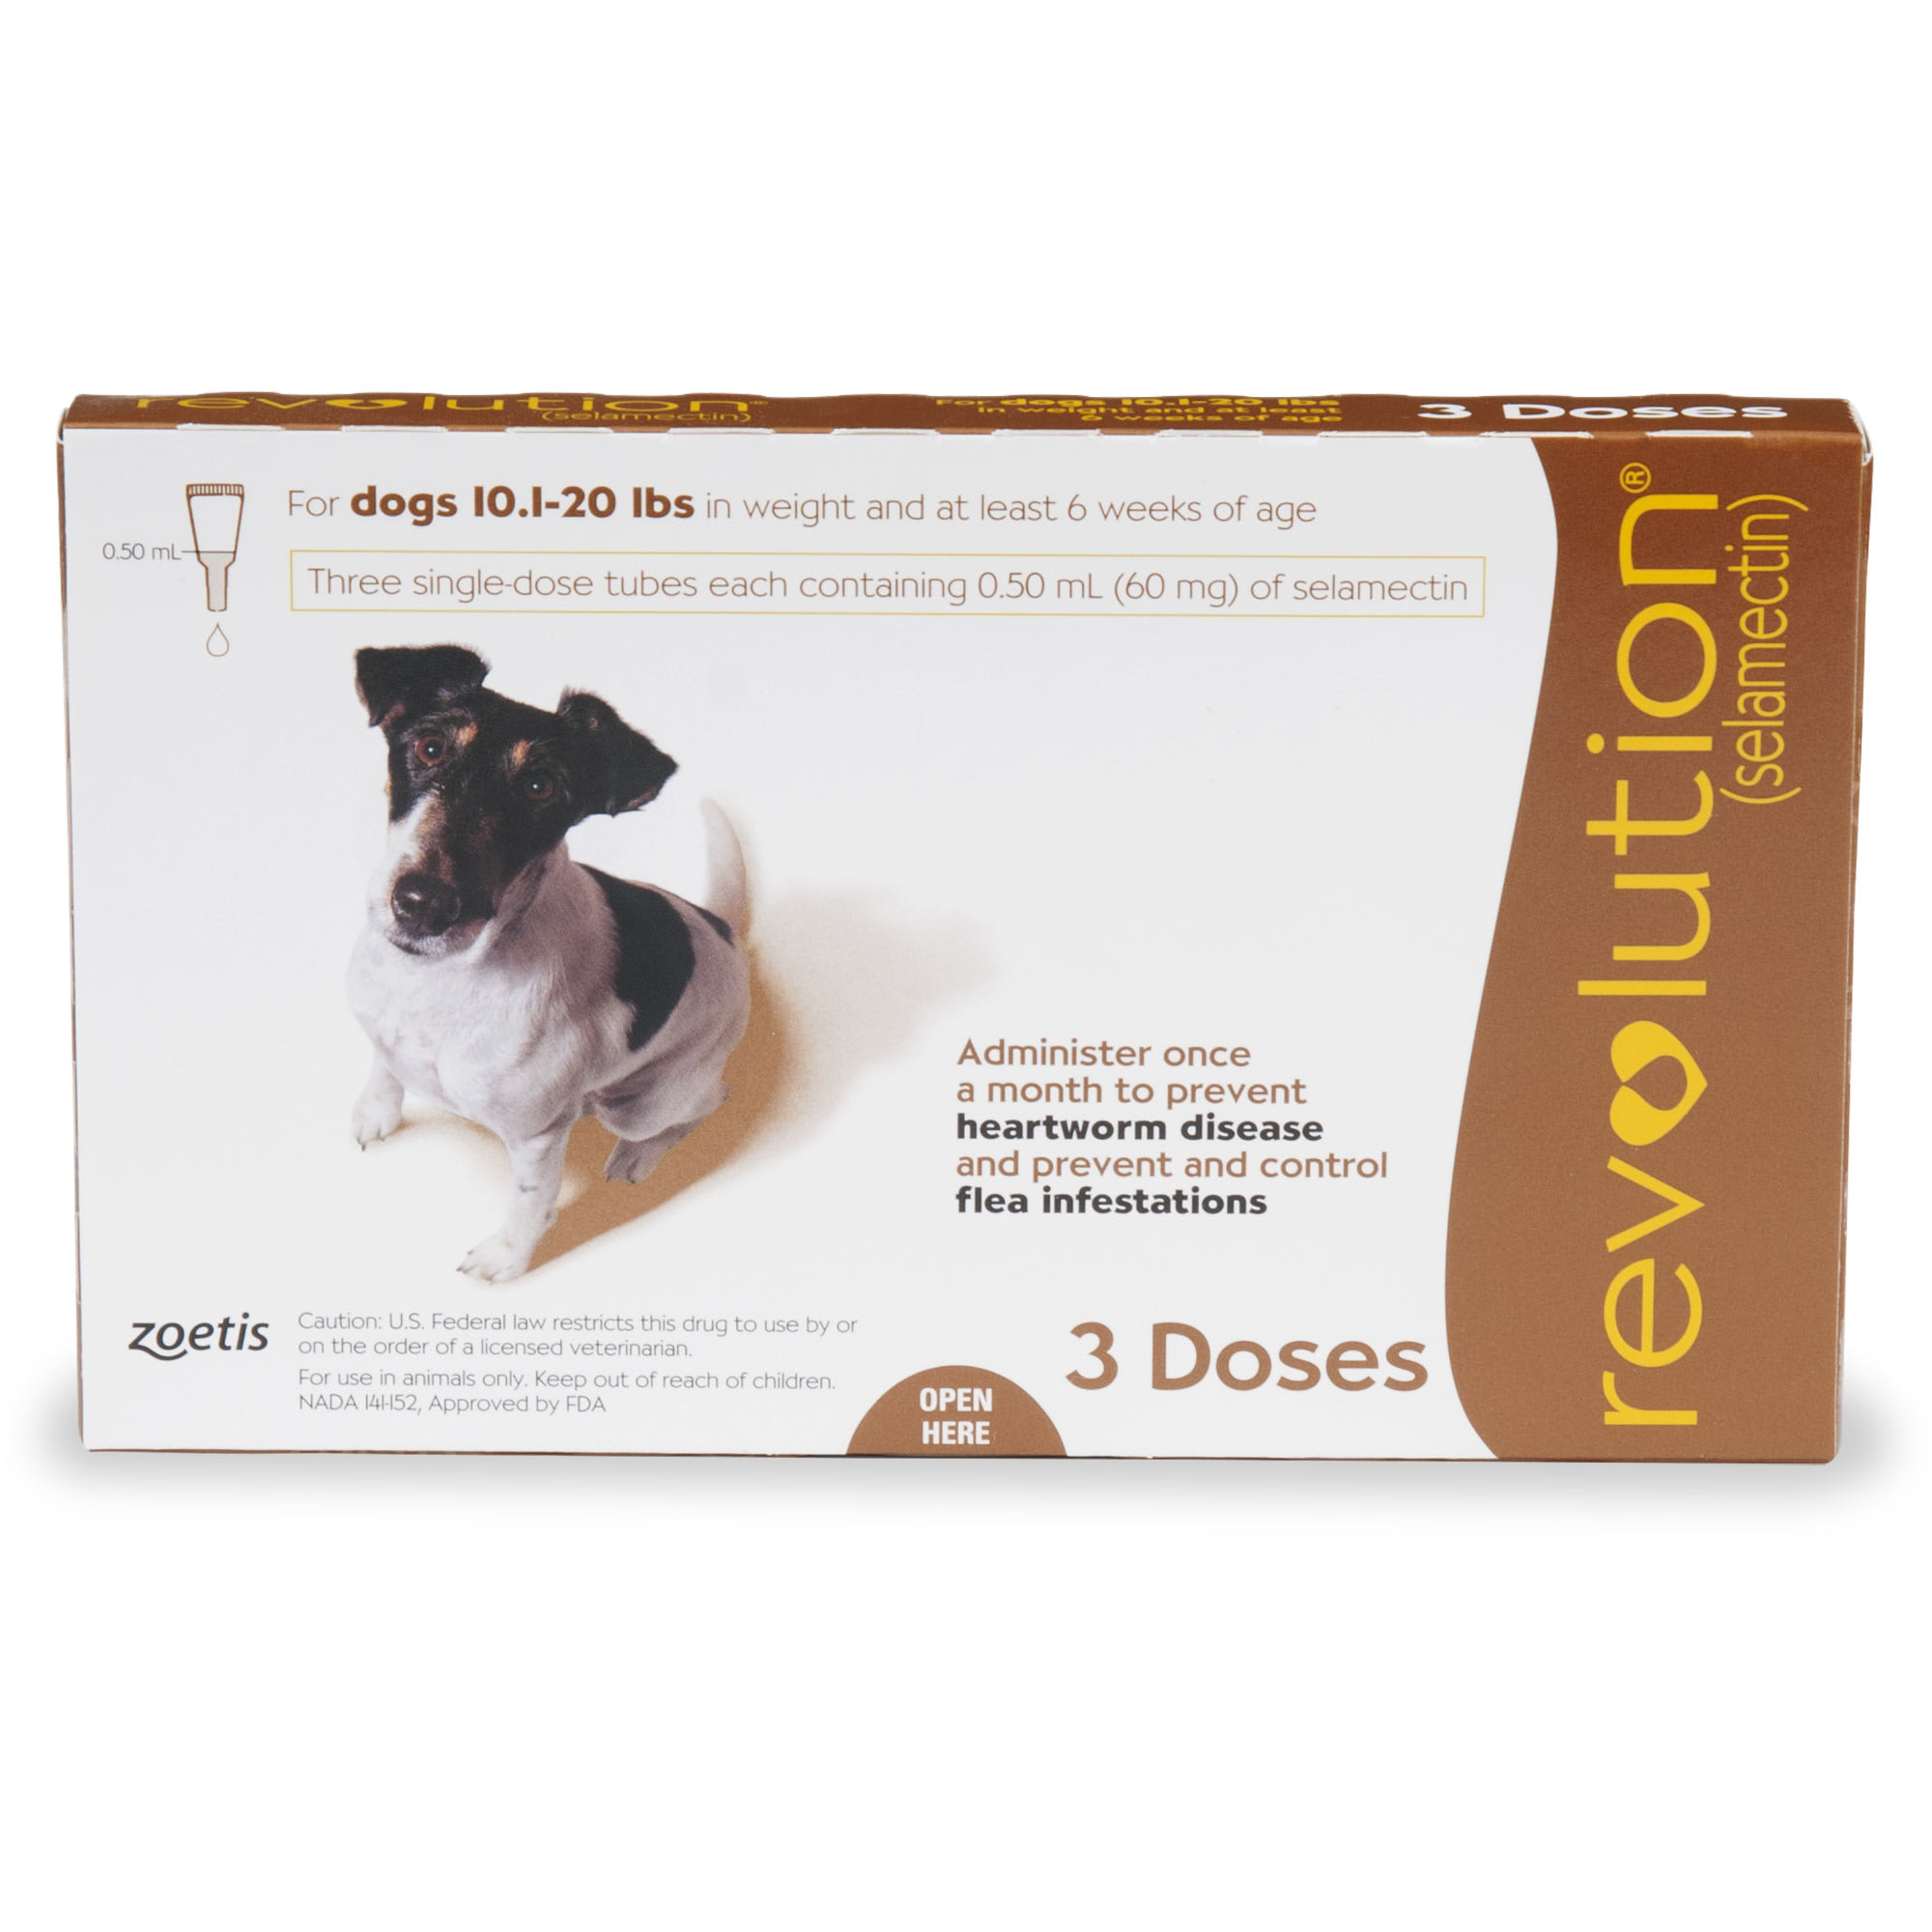 Photos - Dog Medicines & Vitamins Revolution Topical Solution for Dogs 10.1-20 lbs, 3 Month Suppl 